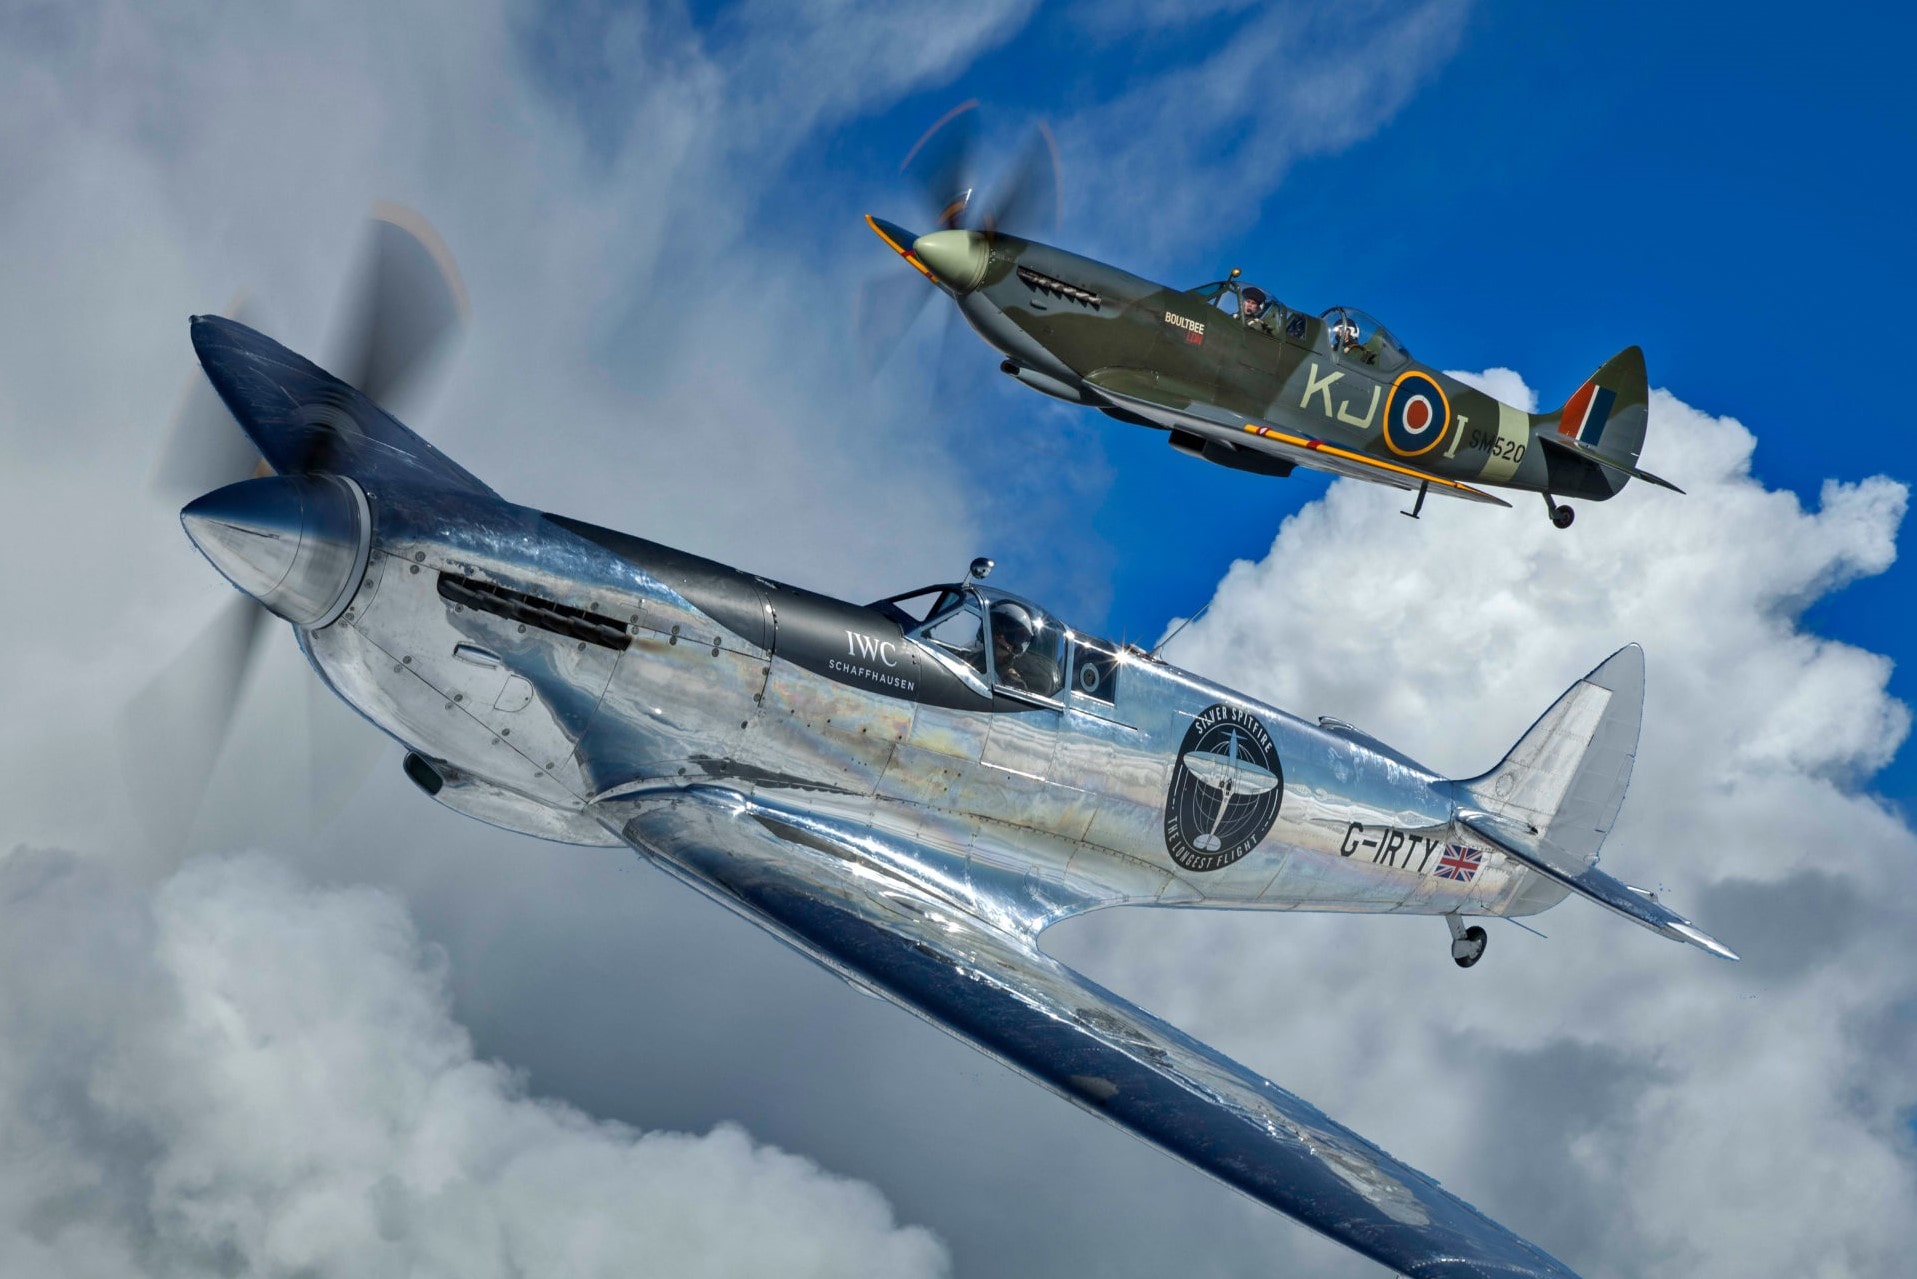 A silver spitfire flying alongside a classic Royal Airforce version in the clouds